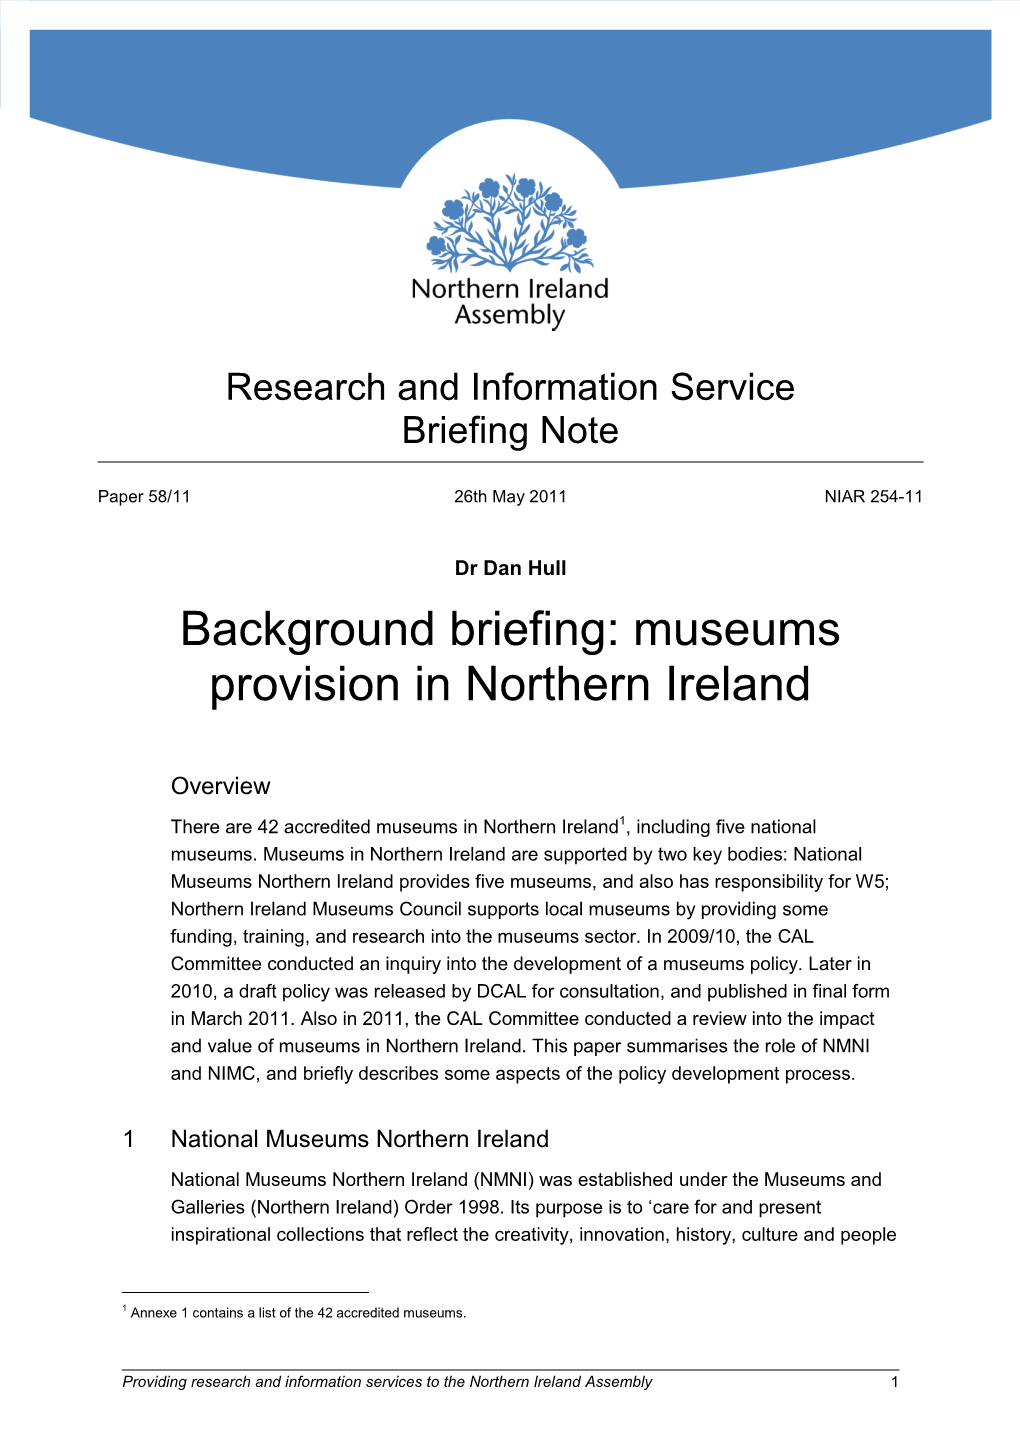 Background Briefing: Museums Provision in Northern Ireland